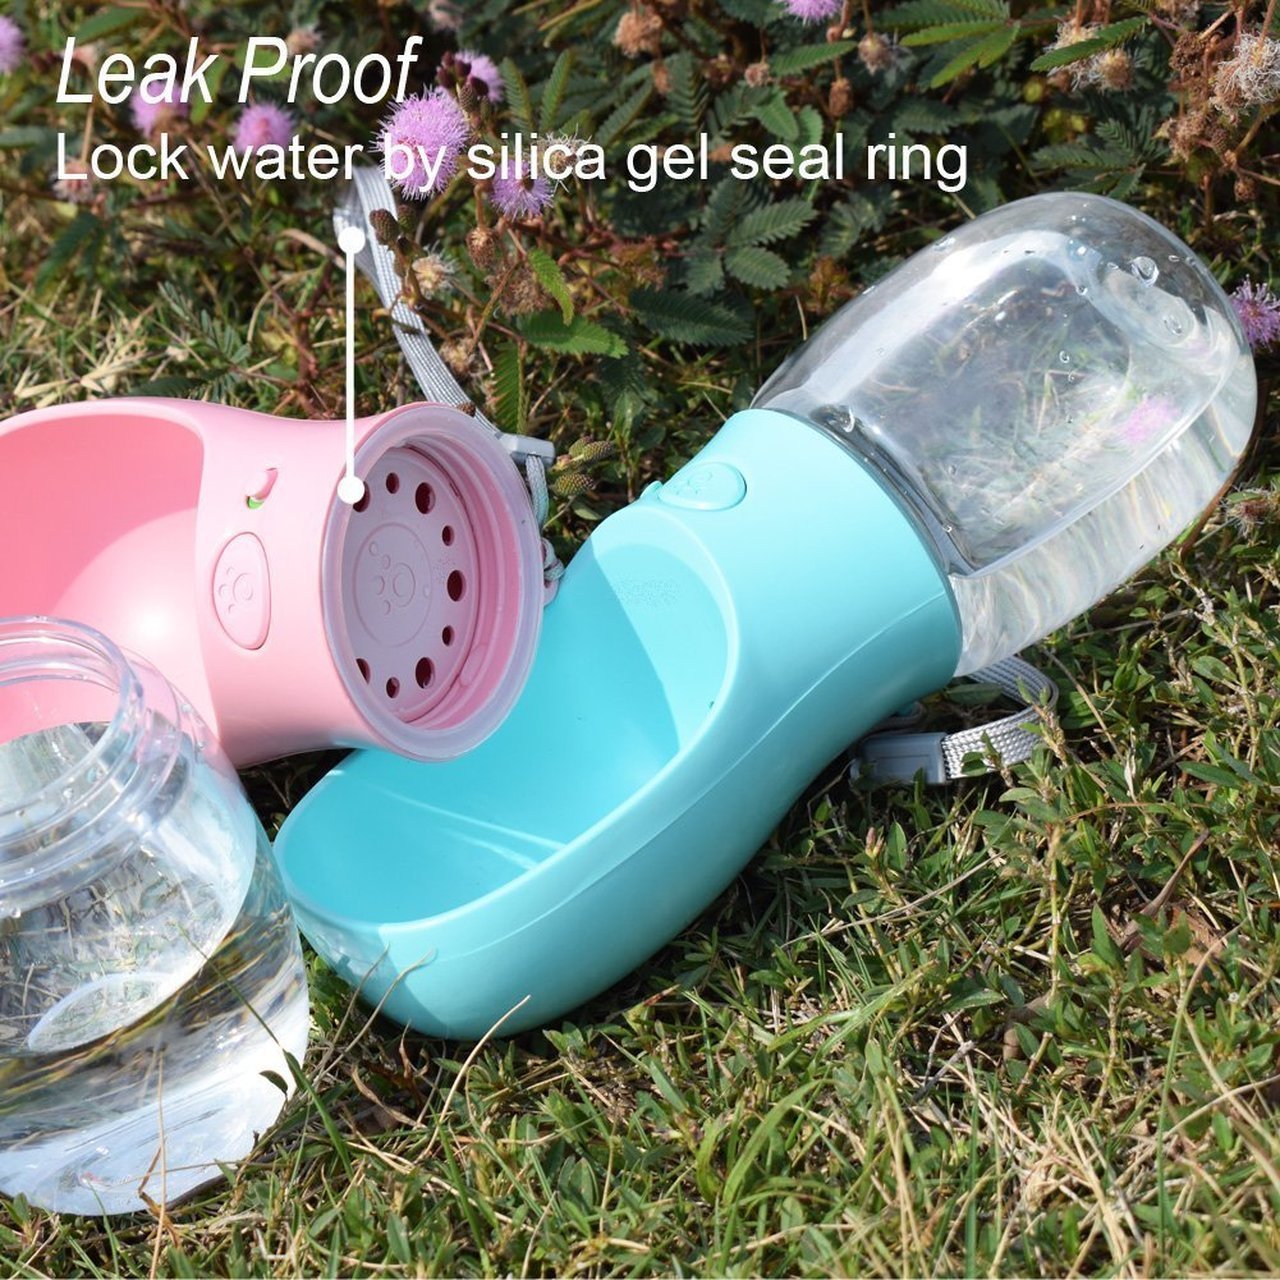 Portable Dog Water Bottle - Waggy Tails